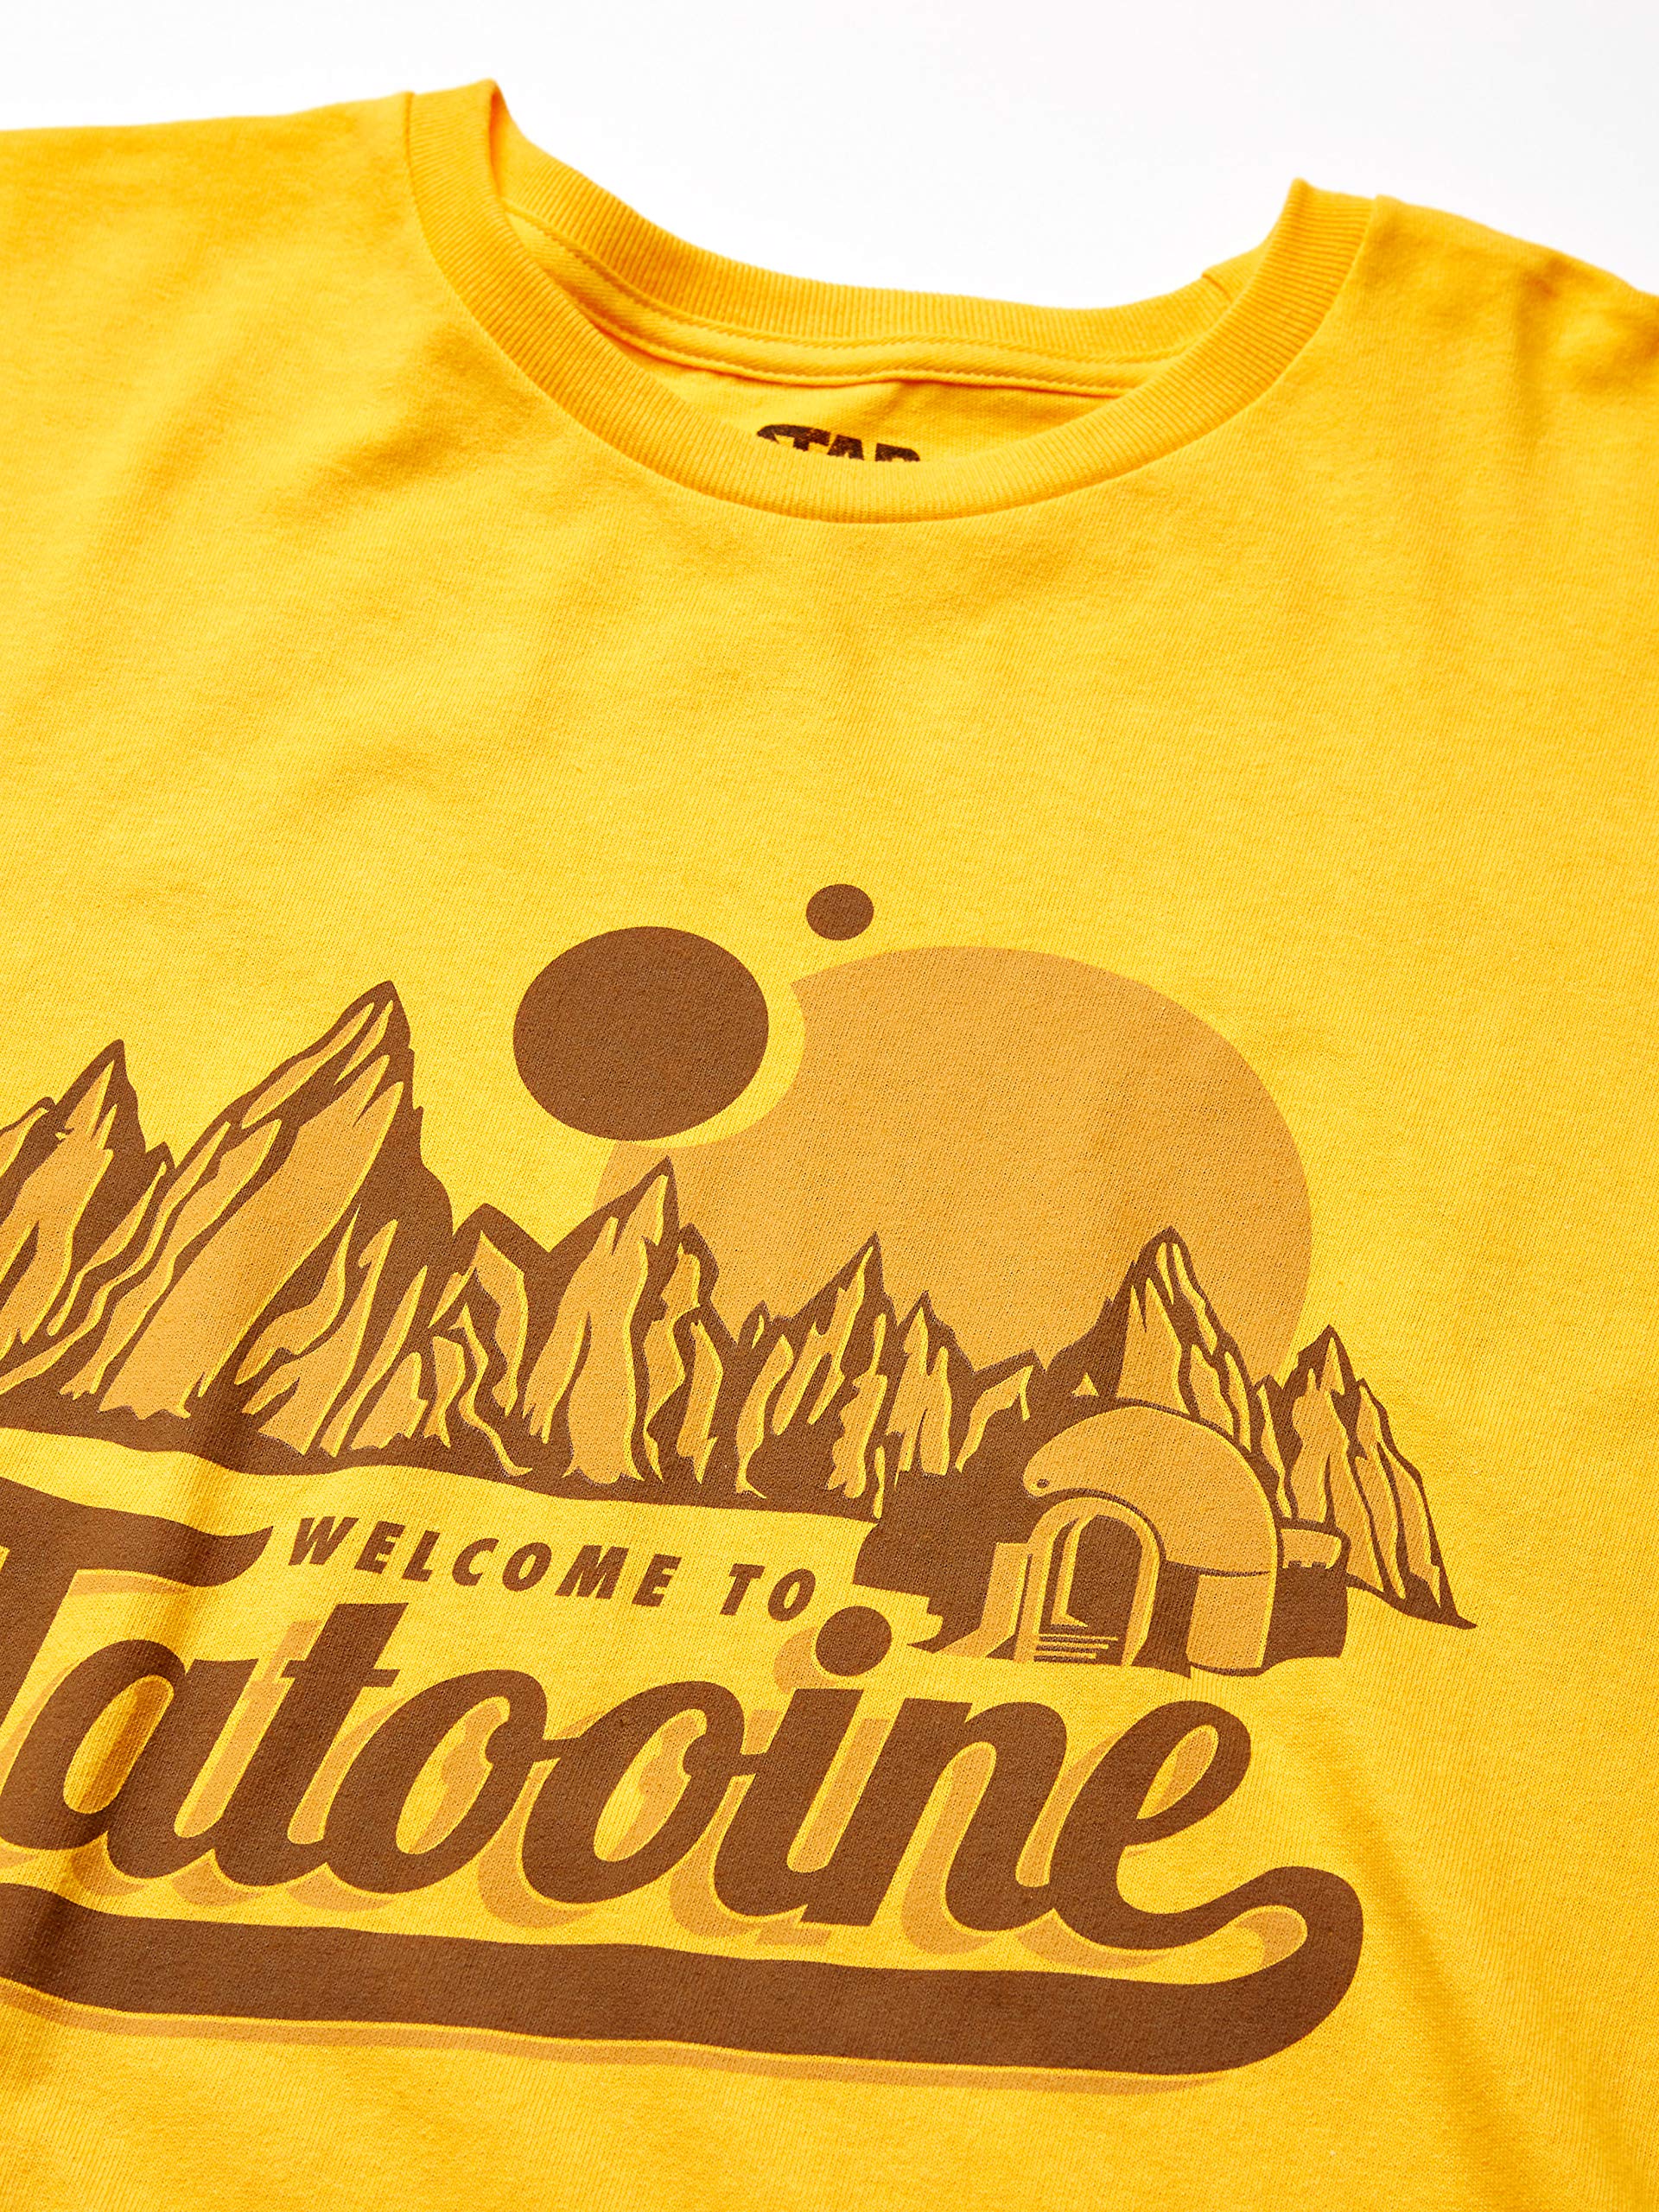 STAR WARS Welcome to Tatooine T-Shirt for Adults